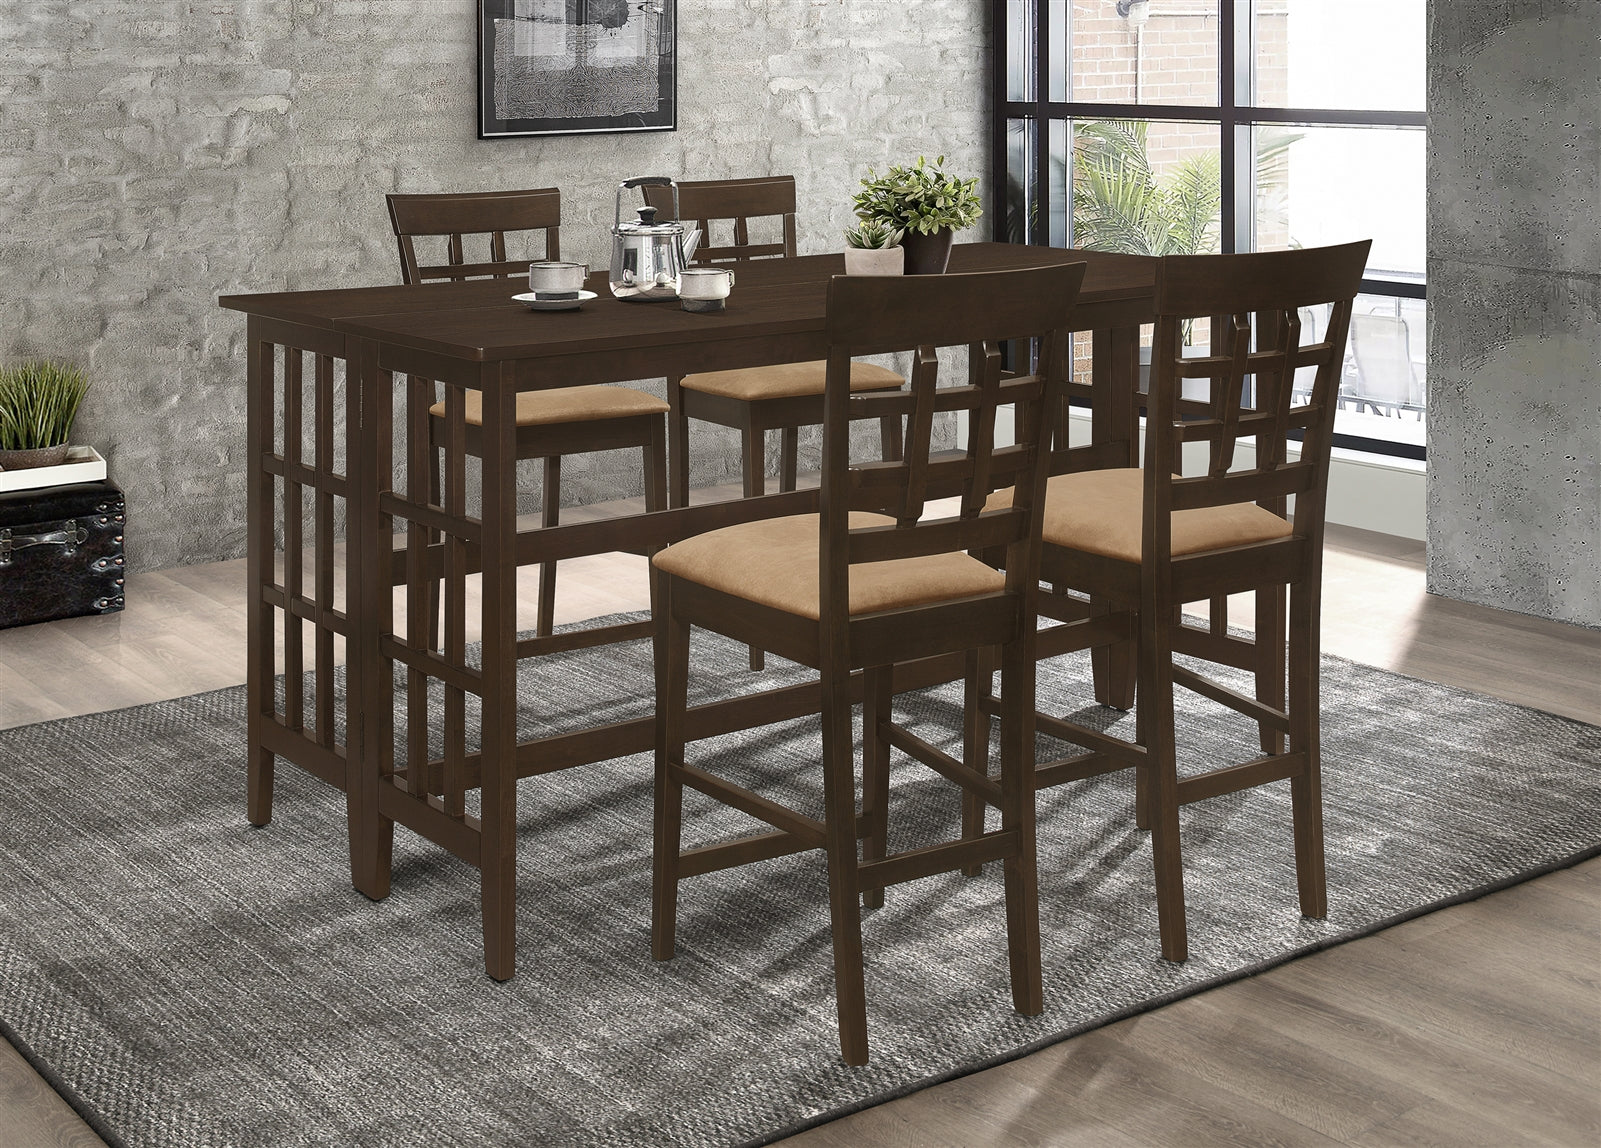 Carmina II Transitional Style Counter Height Dining Set